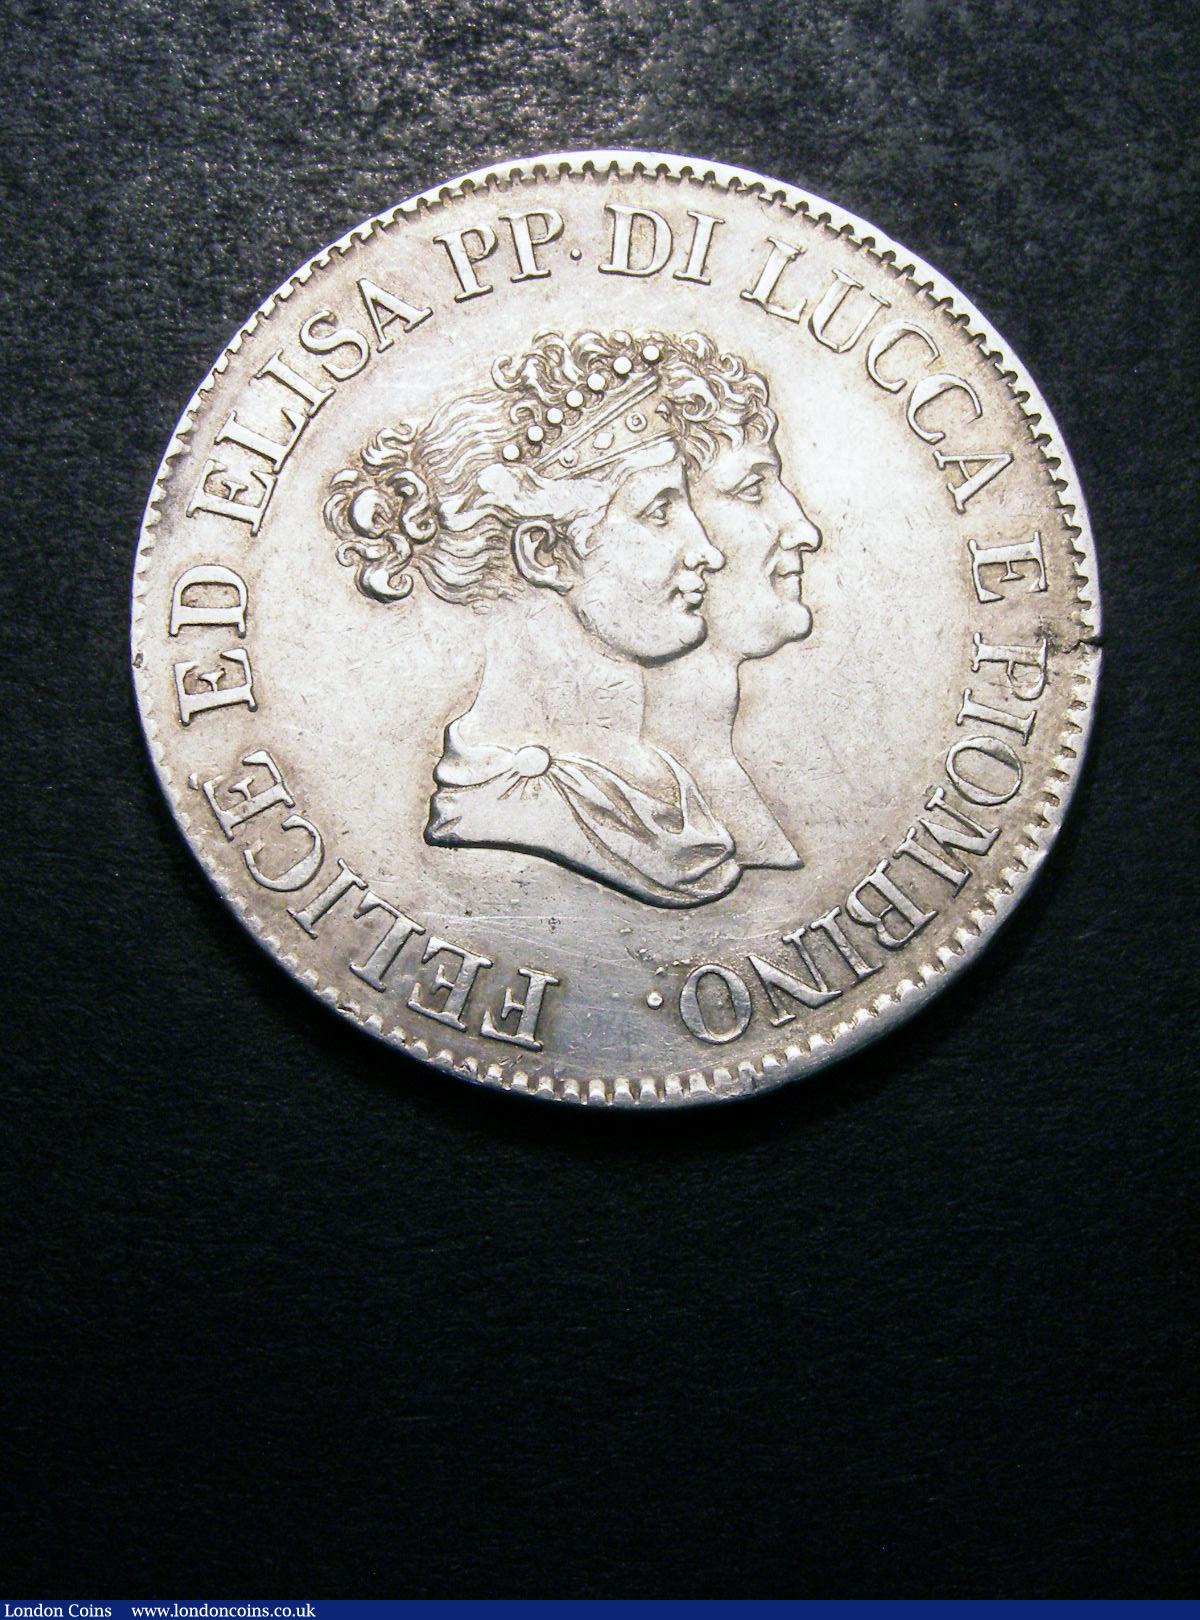 Italian States - Lucca 5 Franchi 1805 KM#24.1 VF with a flan crack at 3 o'clock on the obverse : World Coins : Auction 133 : Lot 1394